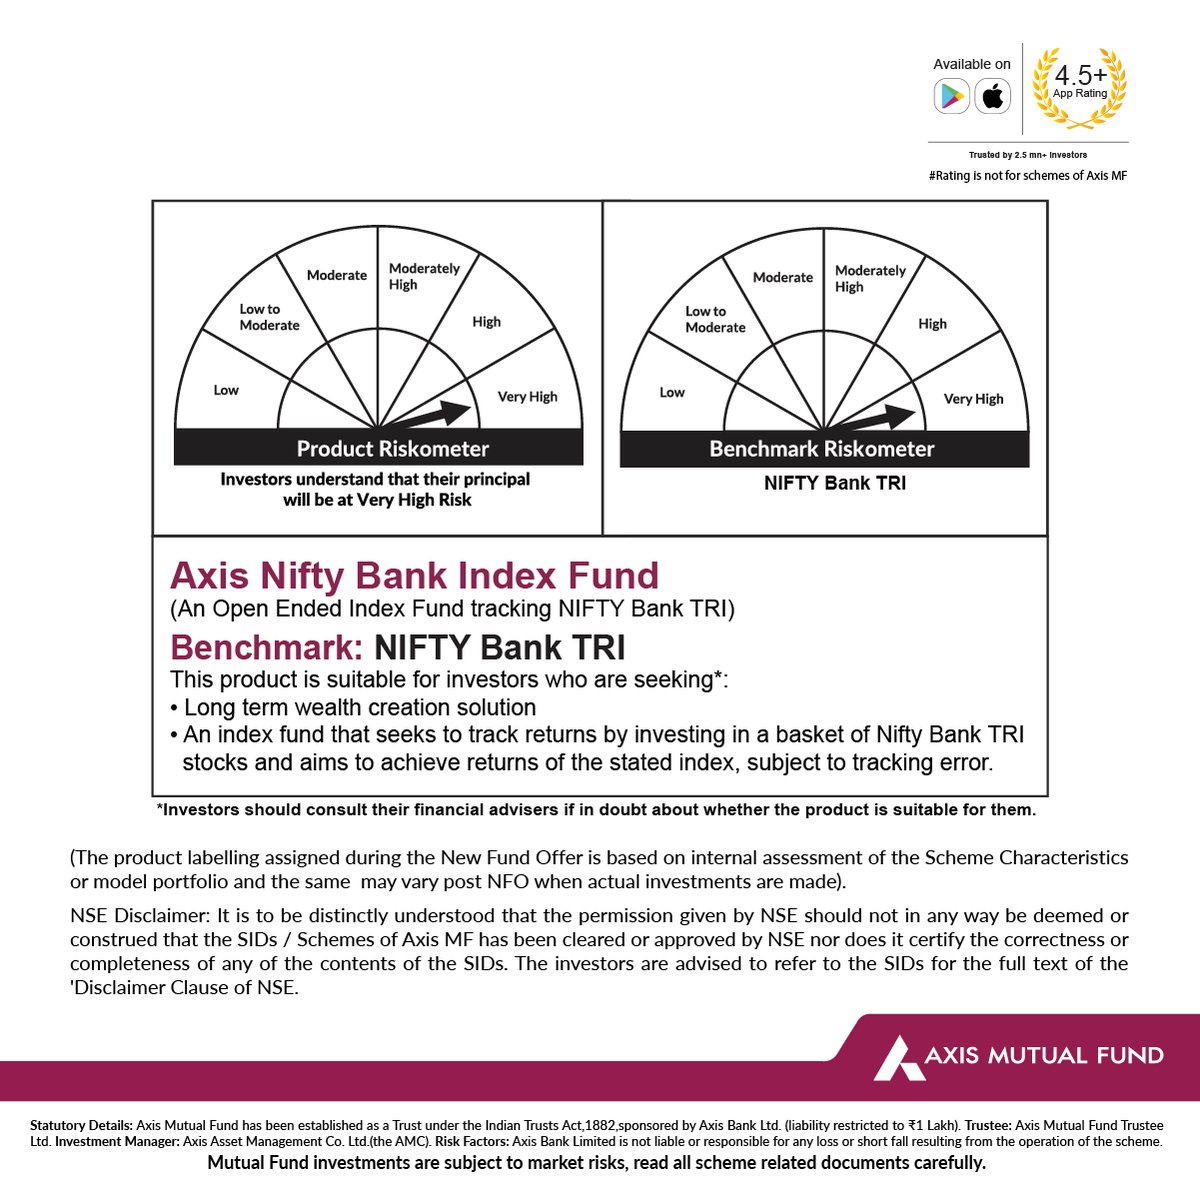 Hurry up! The clock is ticking and there's only one day left to invest in the Axis Nifty Bank Index Fund NFO. Join the league of investors who are set to reap the benefits of India's top banks' growth. Don't let this chance slip away, Invest now: zurl.co/acxl